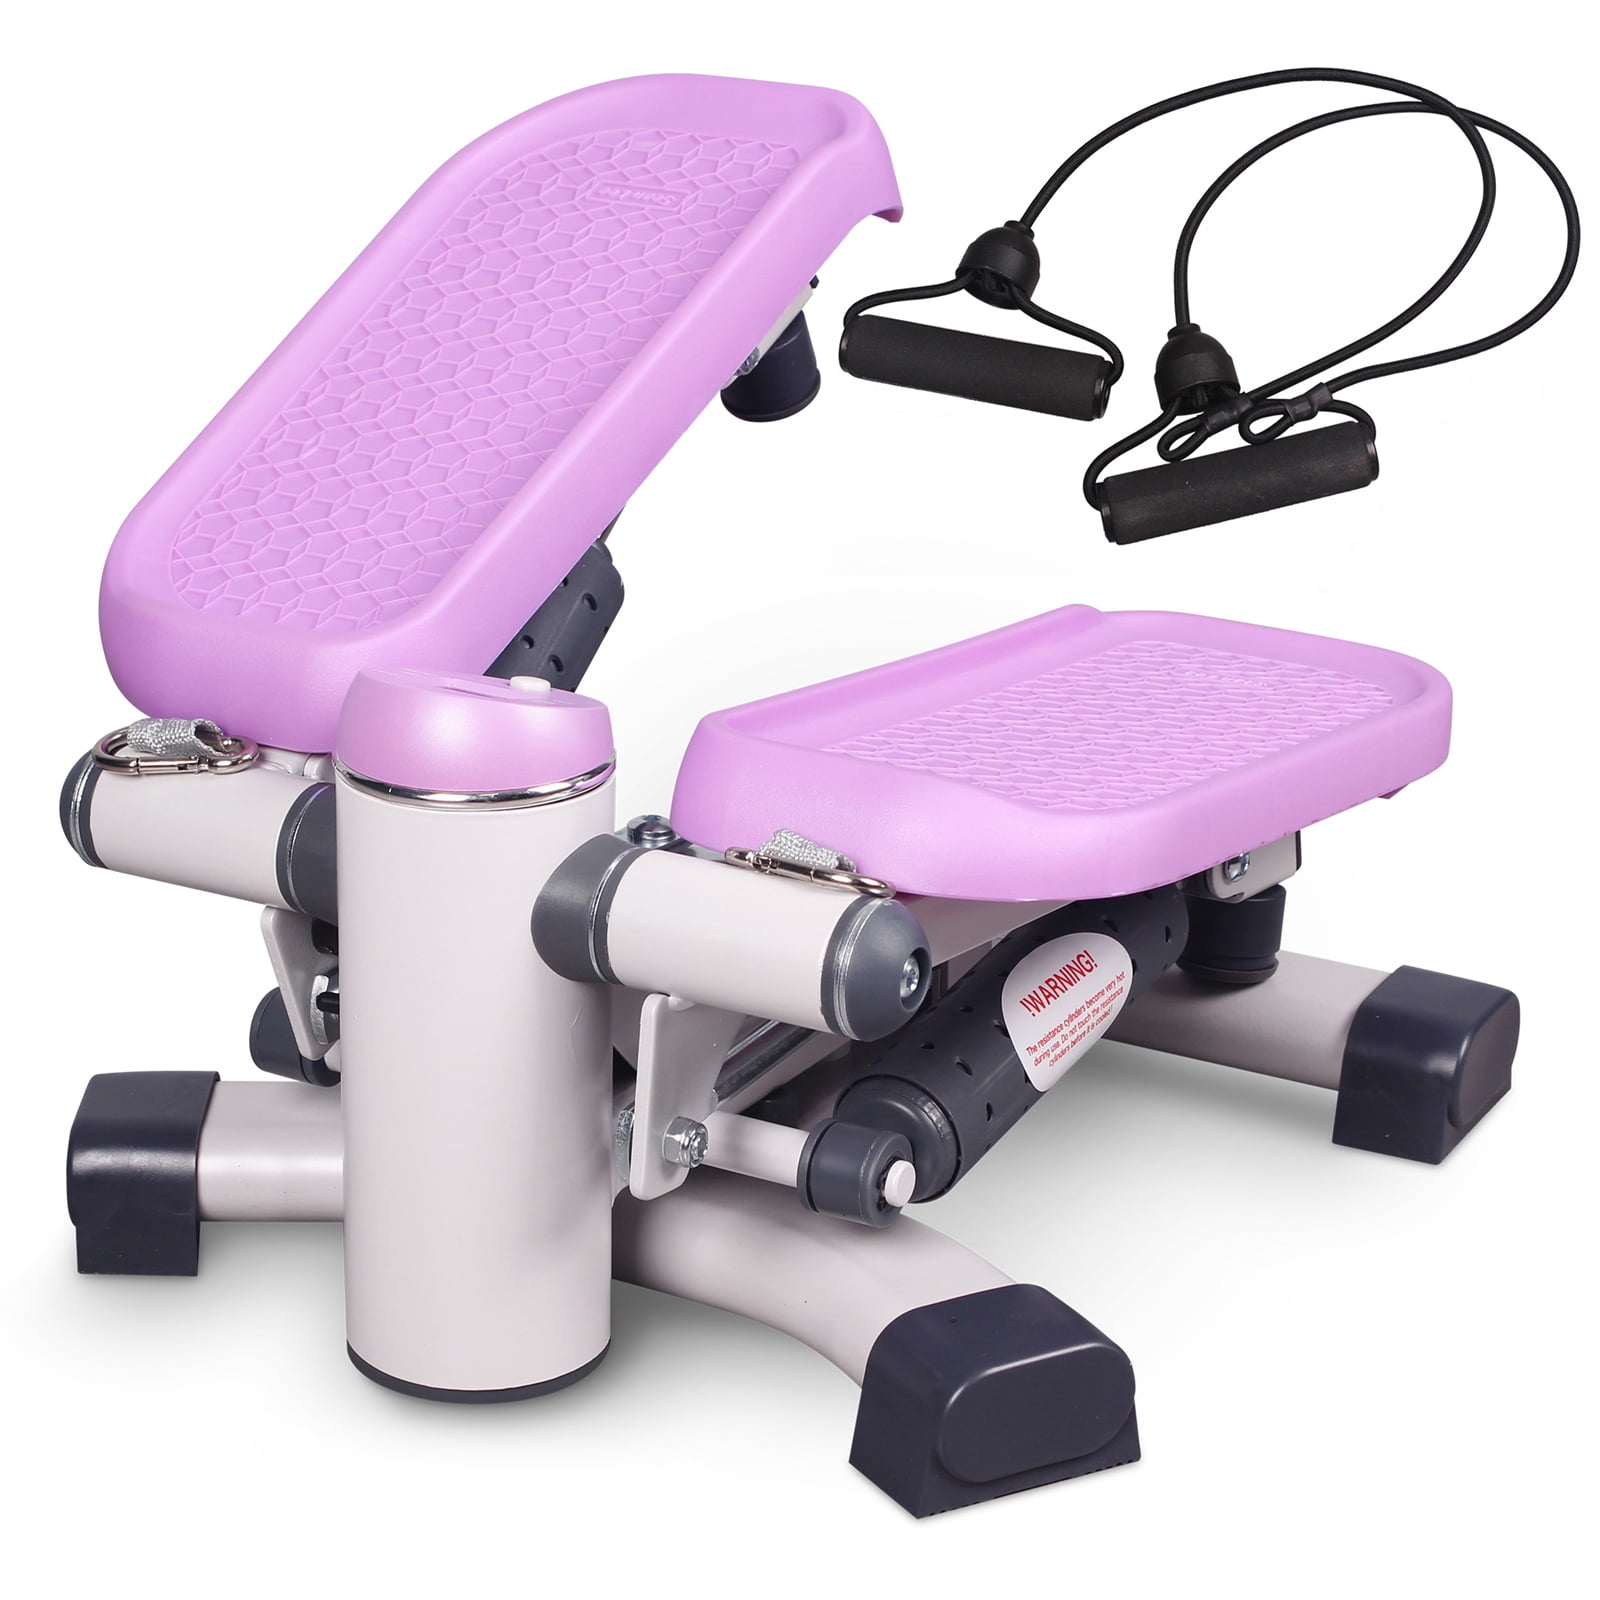 Desk or Office Workouts - P2000 Pink Portable Mini Stair Stepper for Home Sunny Health & Fitness Exercise Stepping Machine 